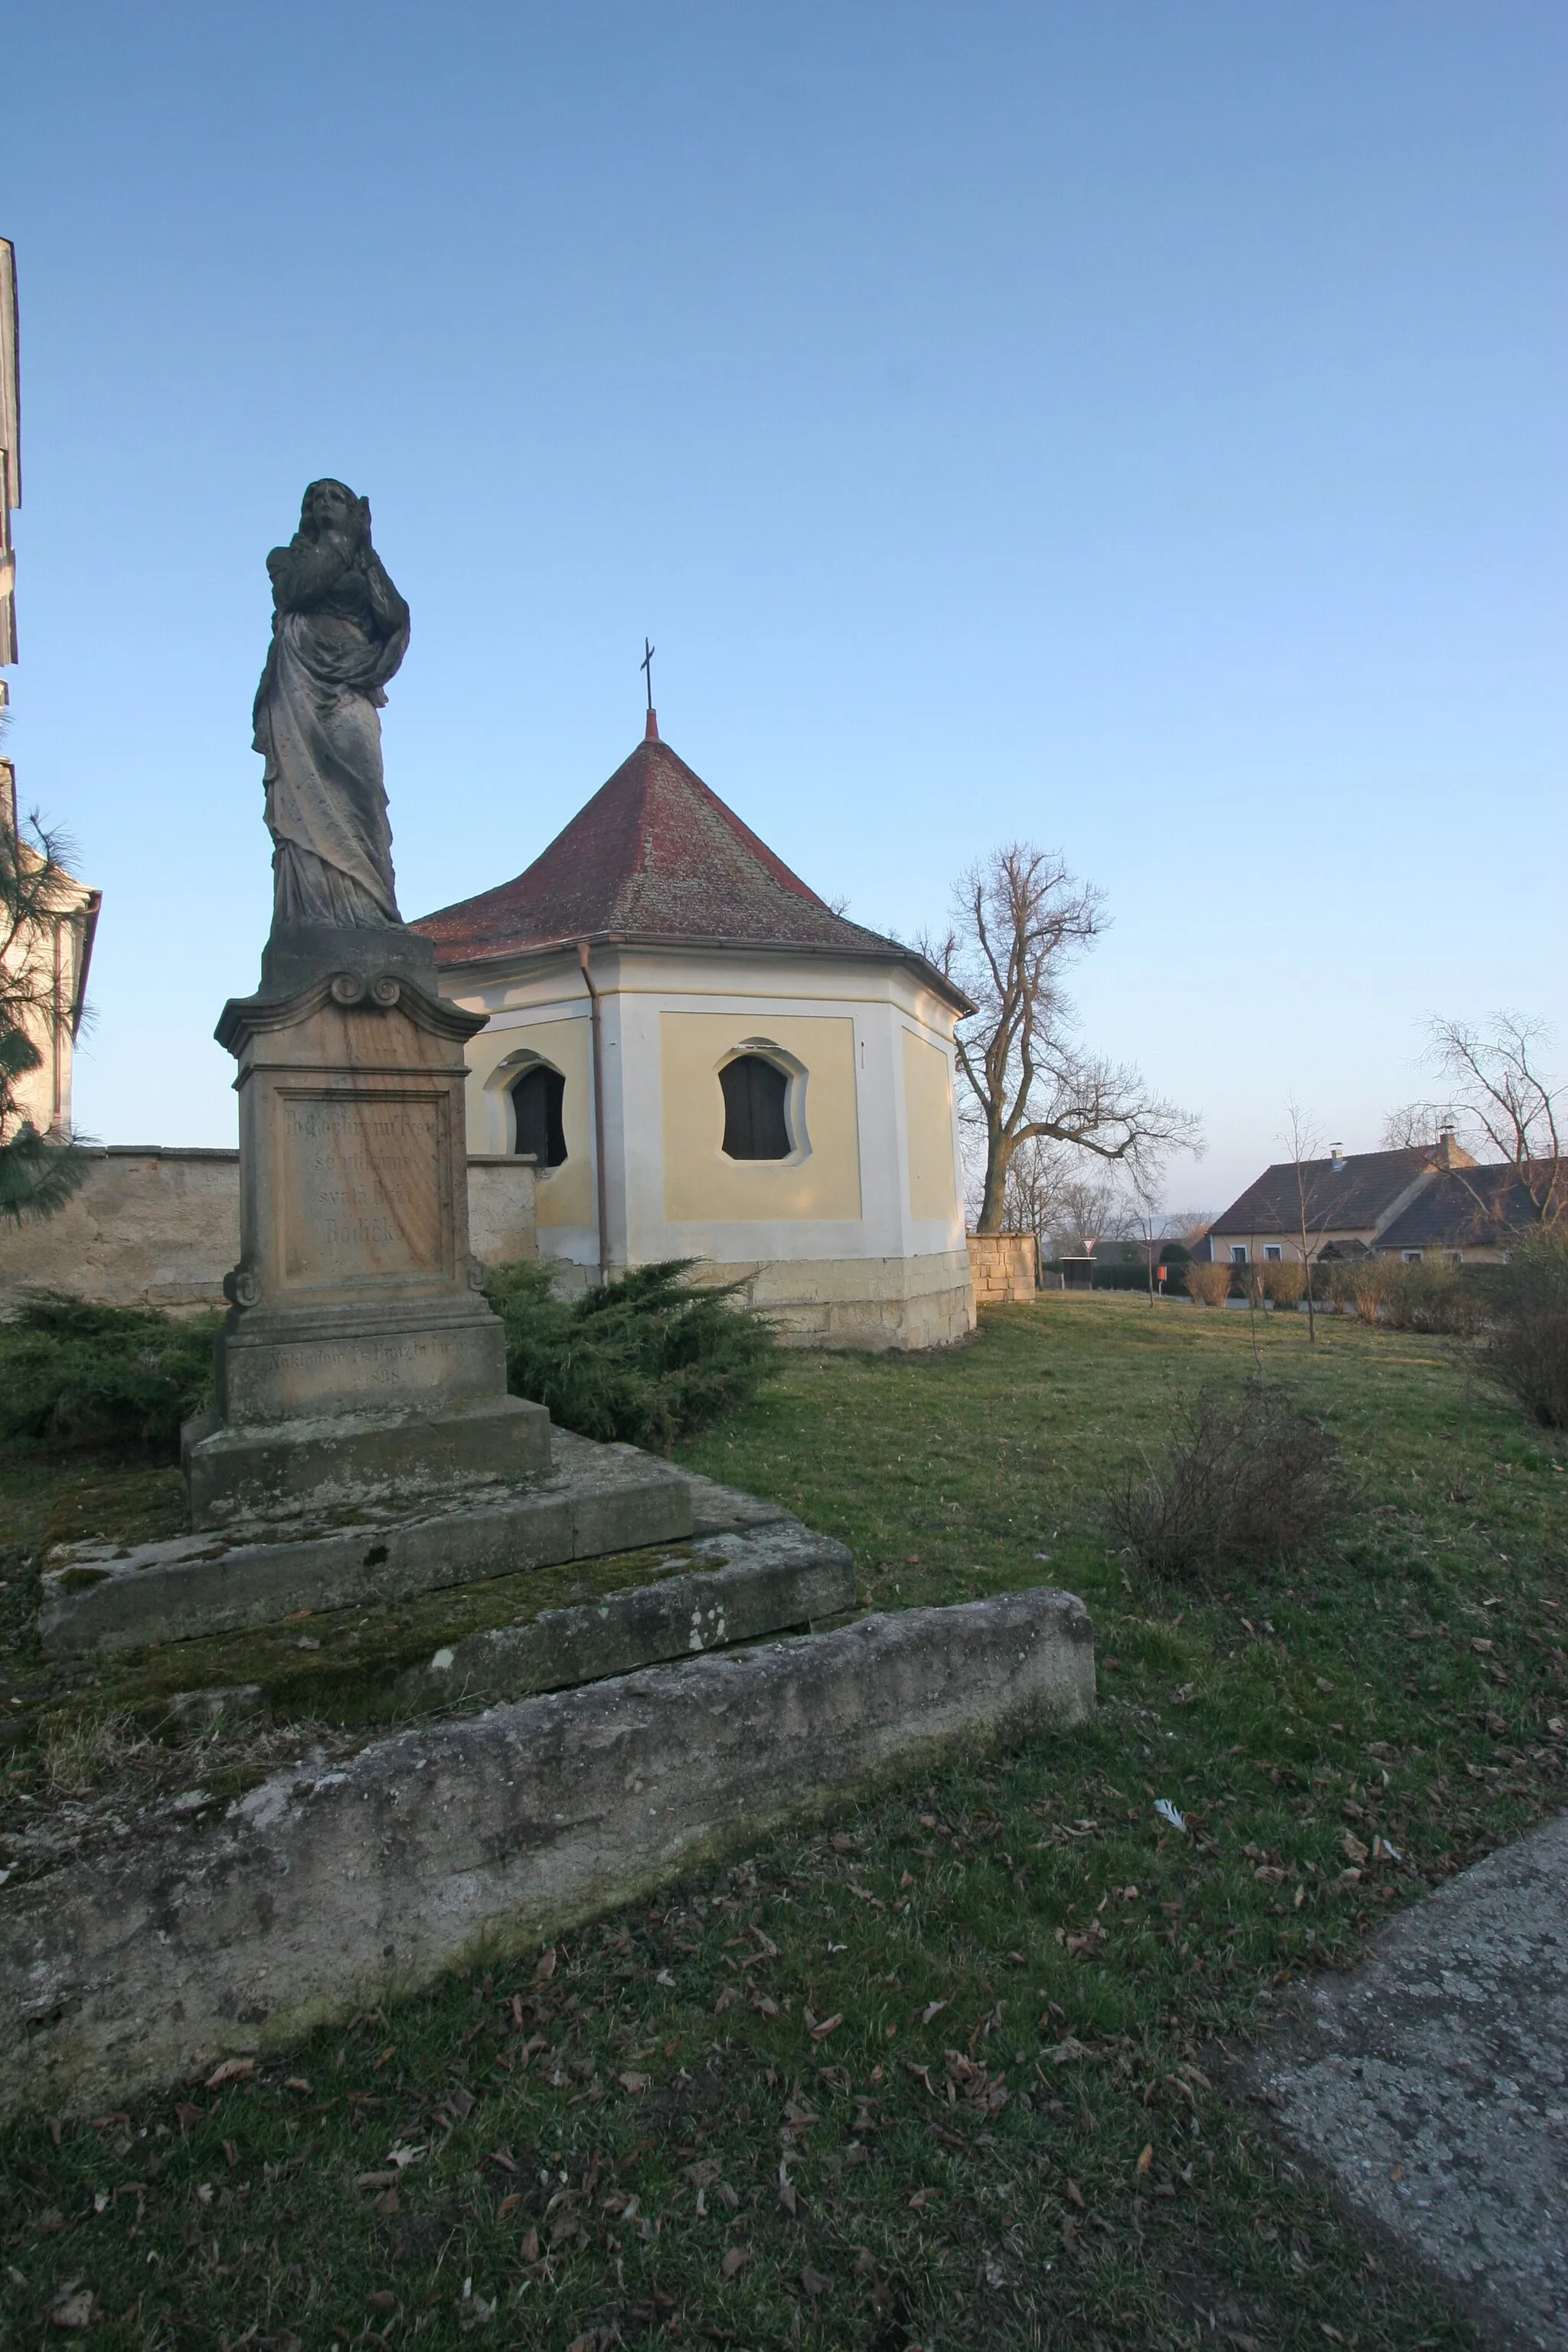 Photo showing: Hradíštko sochy před kostelem
Camera location 50° 21′ 14.7″ N, 15° 25′ 37.3″ E View this and other nearby images on: OpenStreetMap 50.354083;   15.427028

This file was created as a part of the photographic program of Wikimedia Czech Republic. Project: Foto českých obcí The program supports Wikimedia Commons photographers in the Czech Republic.